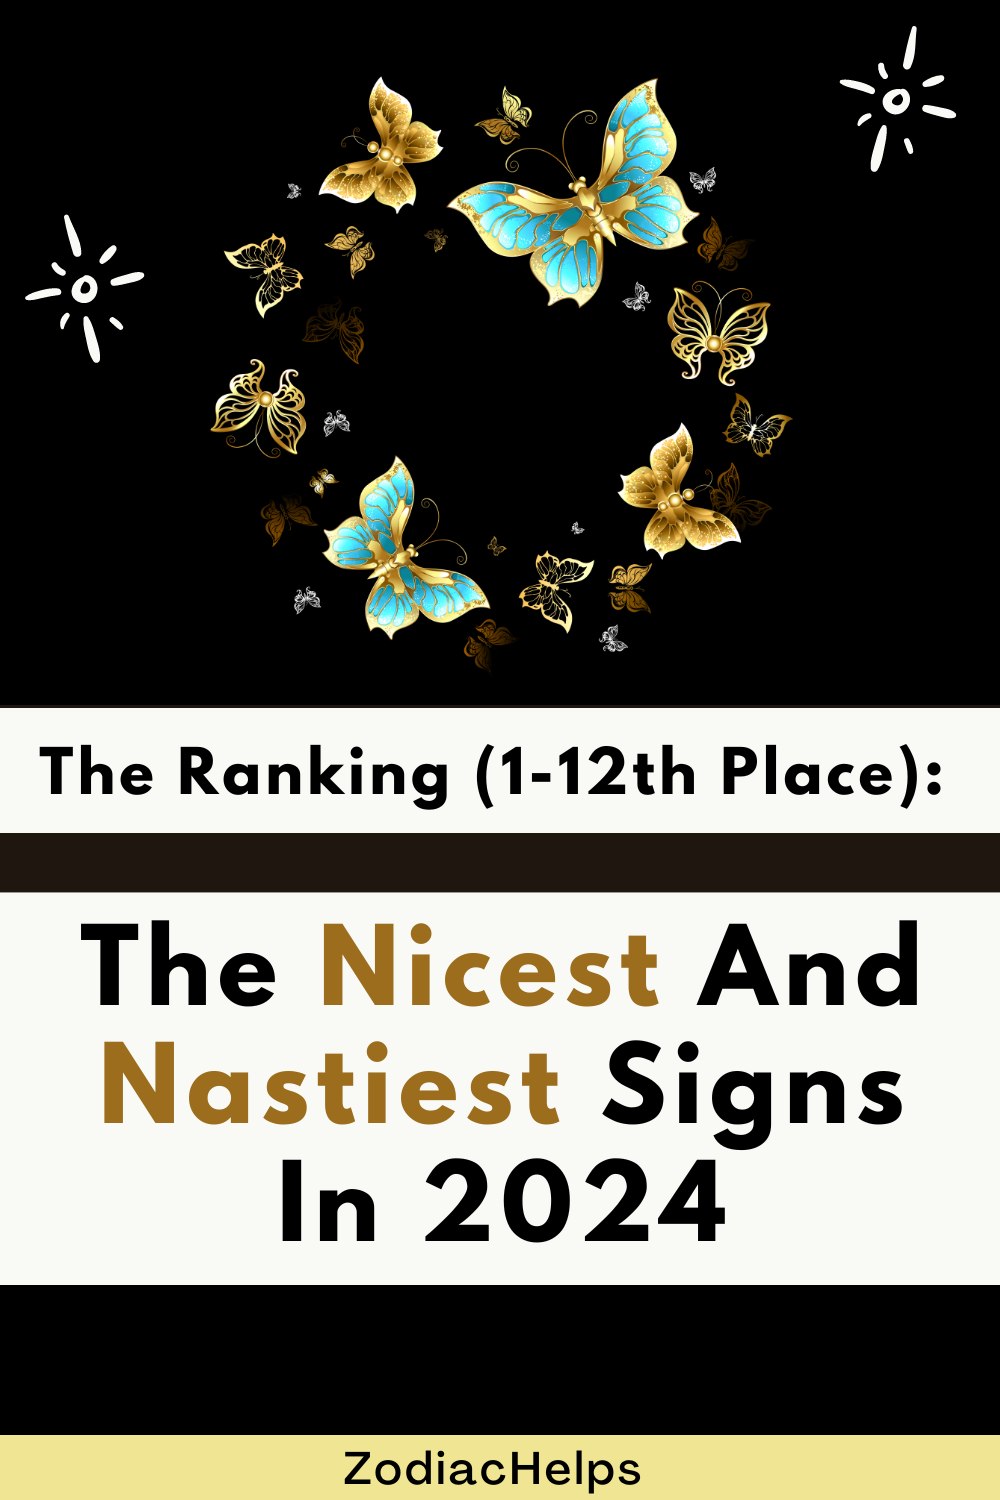 The Ranking (1-12th Place): The Nicest And Nastiest Signs In 2024